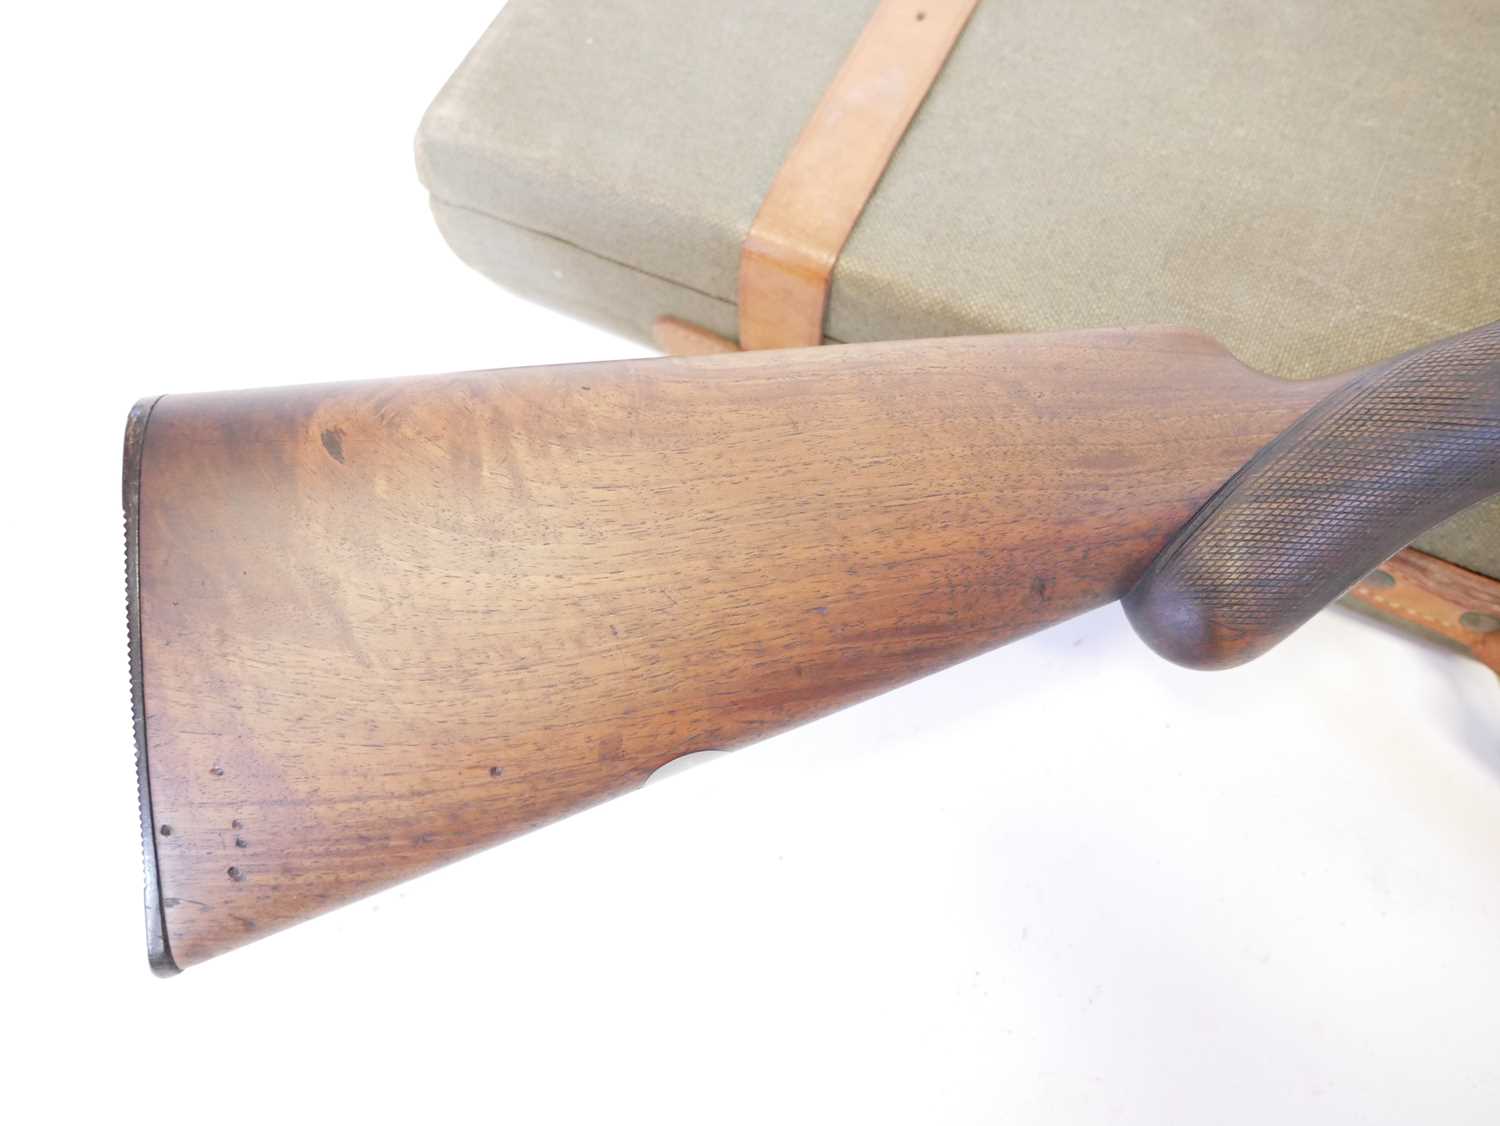 Midland 12 bore side by side hammer gun with a Gunmark travel case, serial number 32121, 30 inch - Image 3 of 16